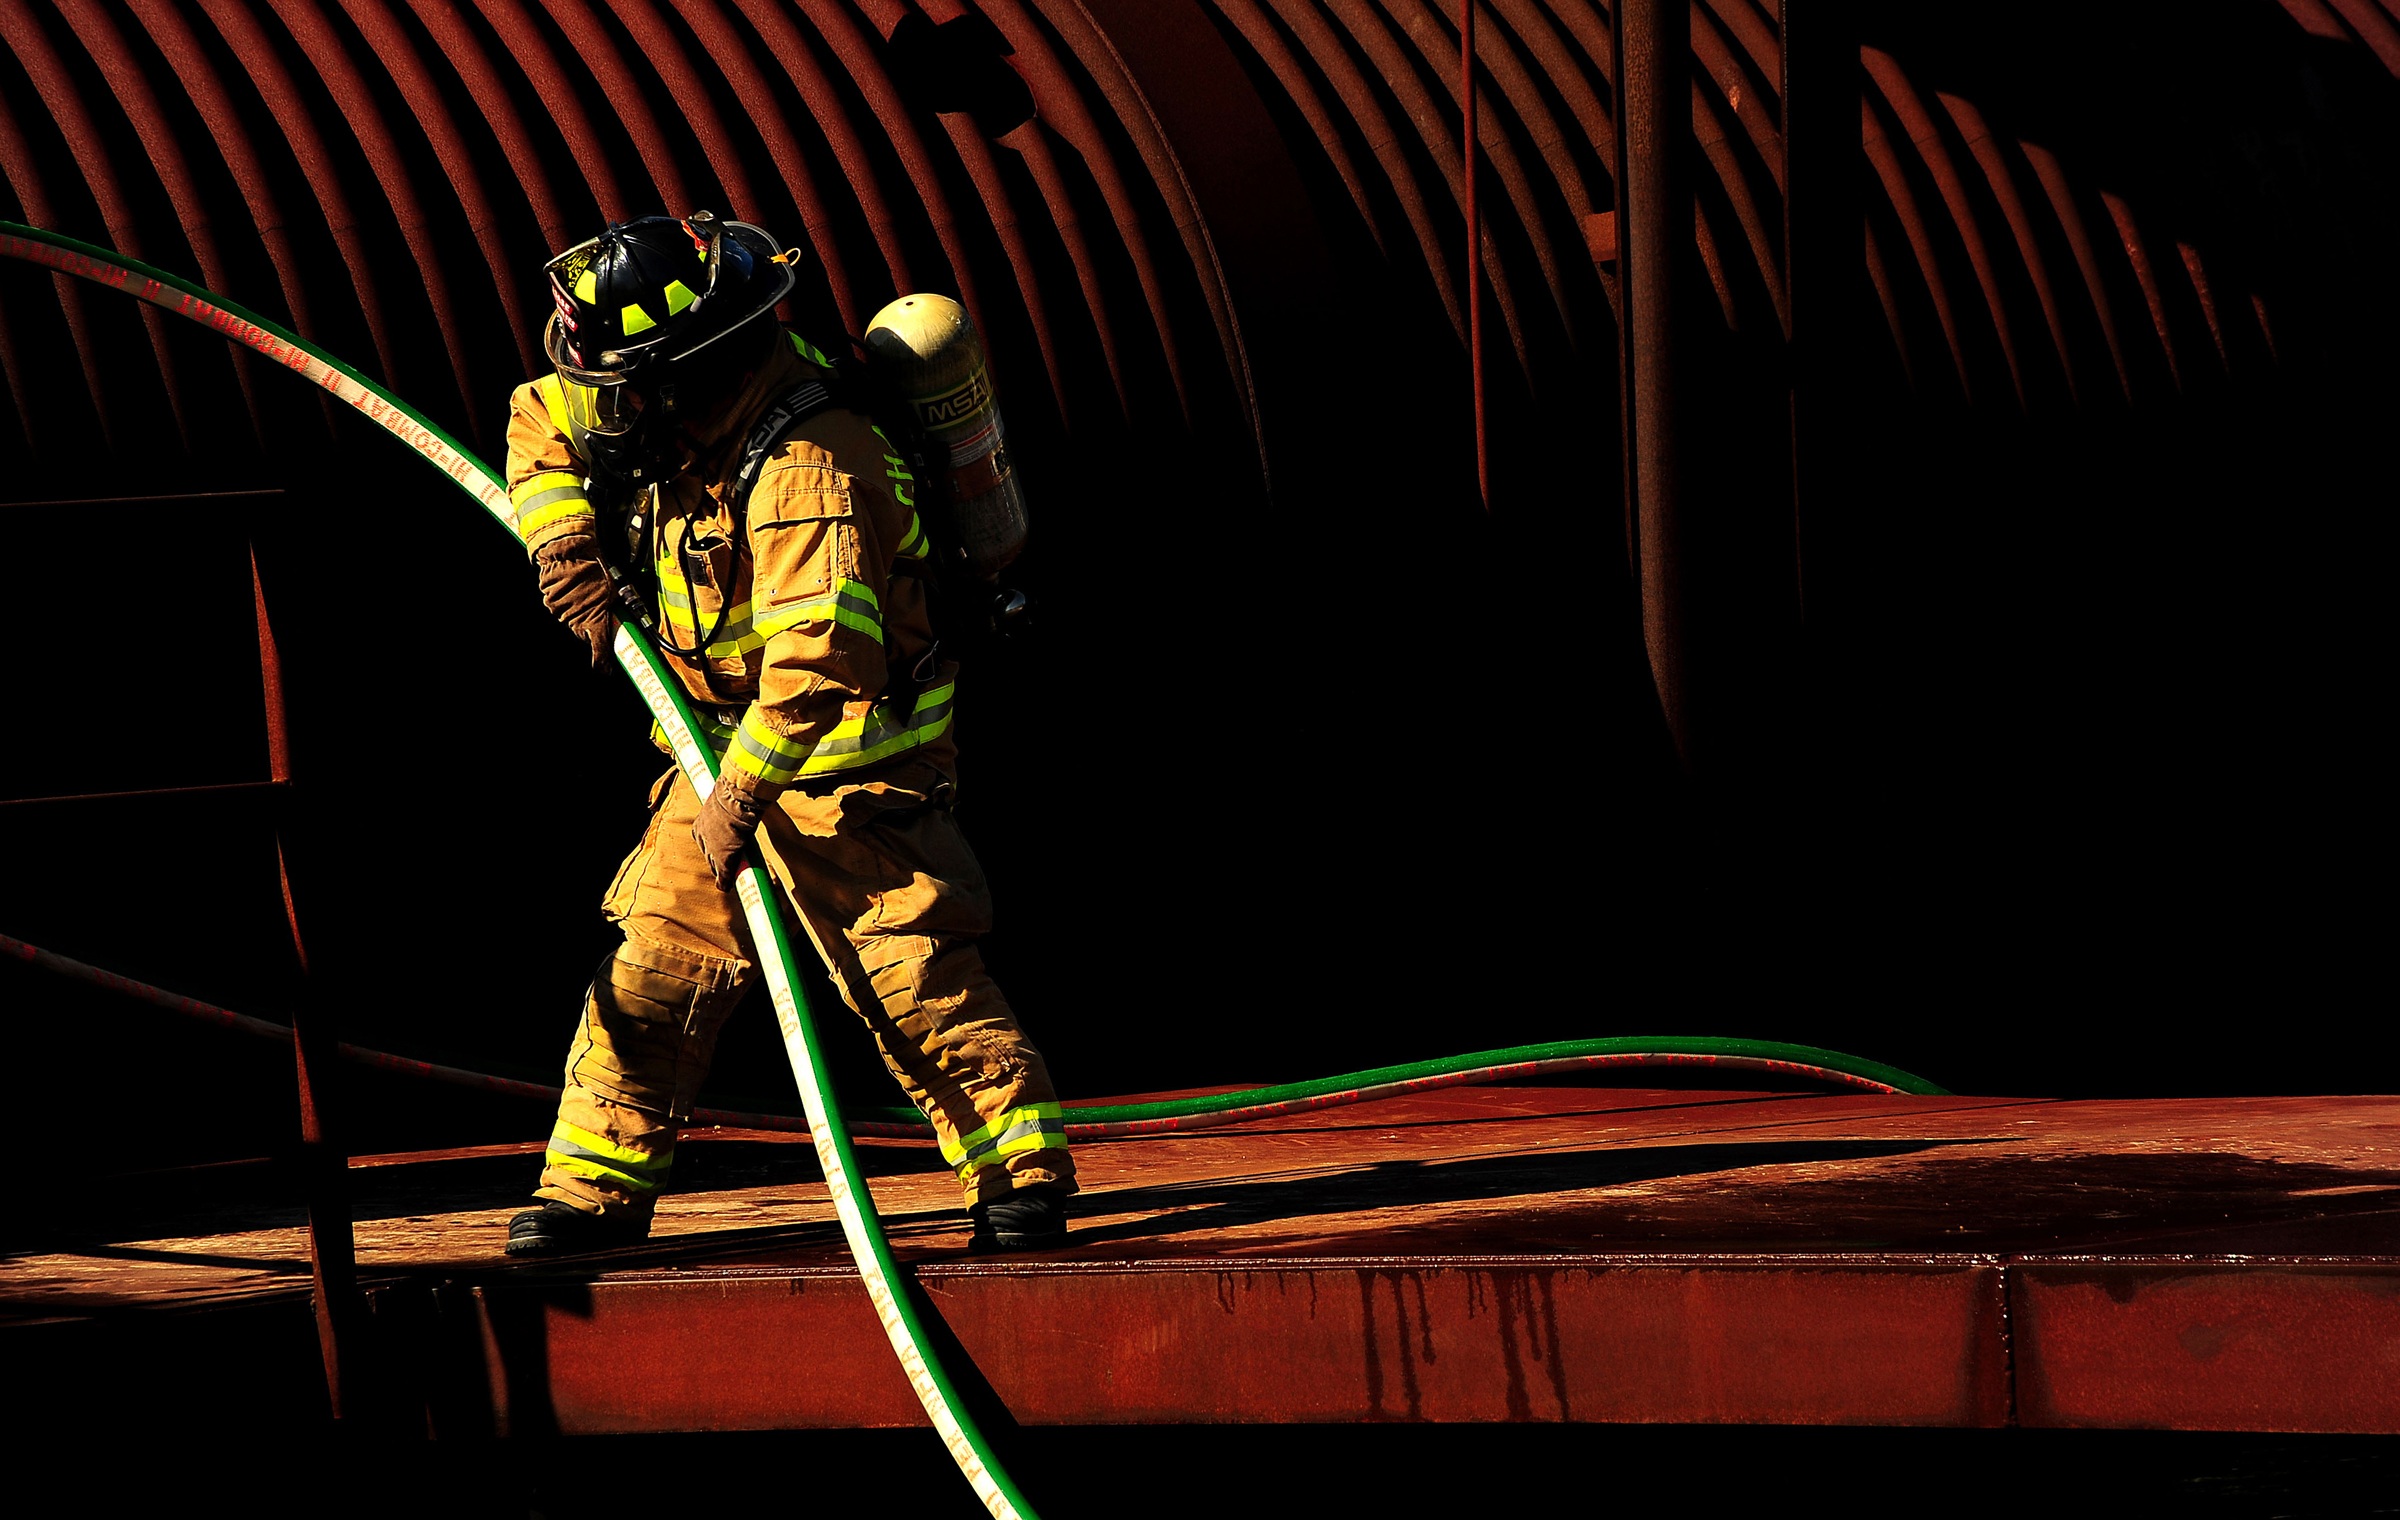 Firefighter with the waterpipe photo